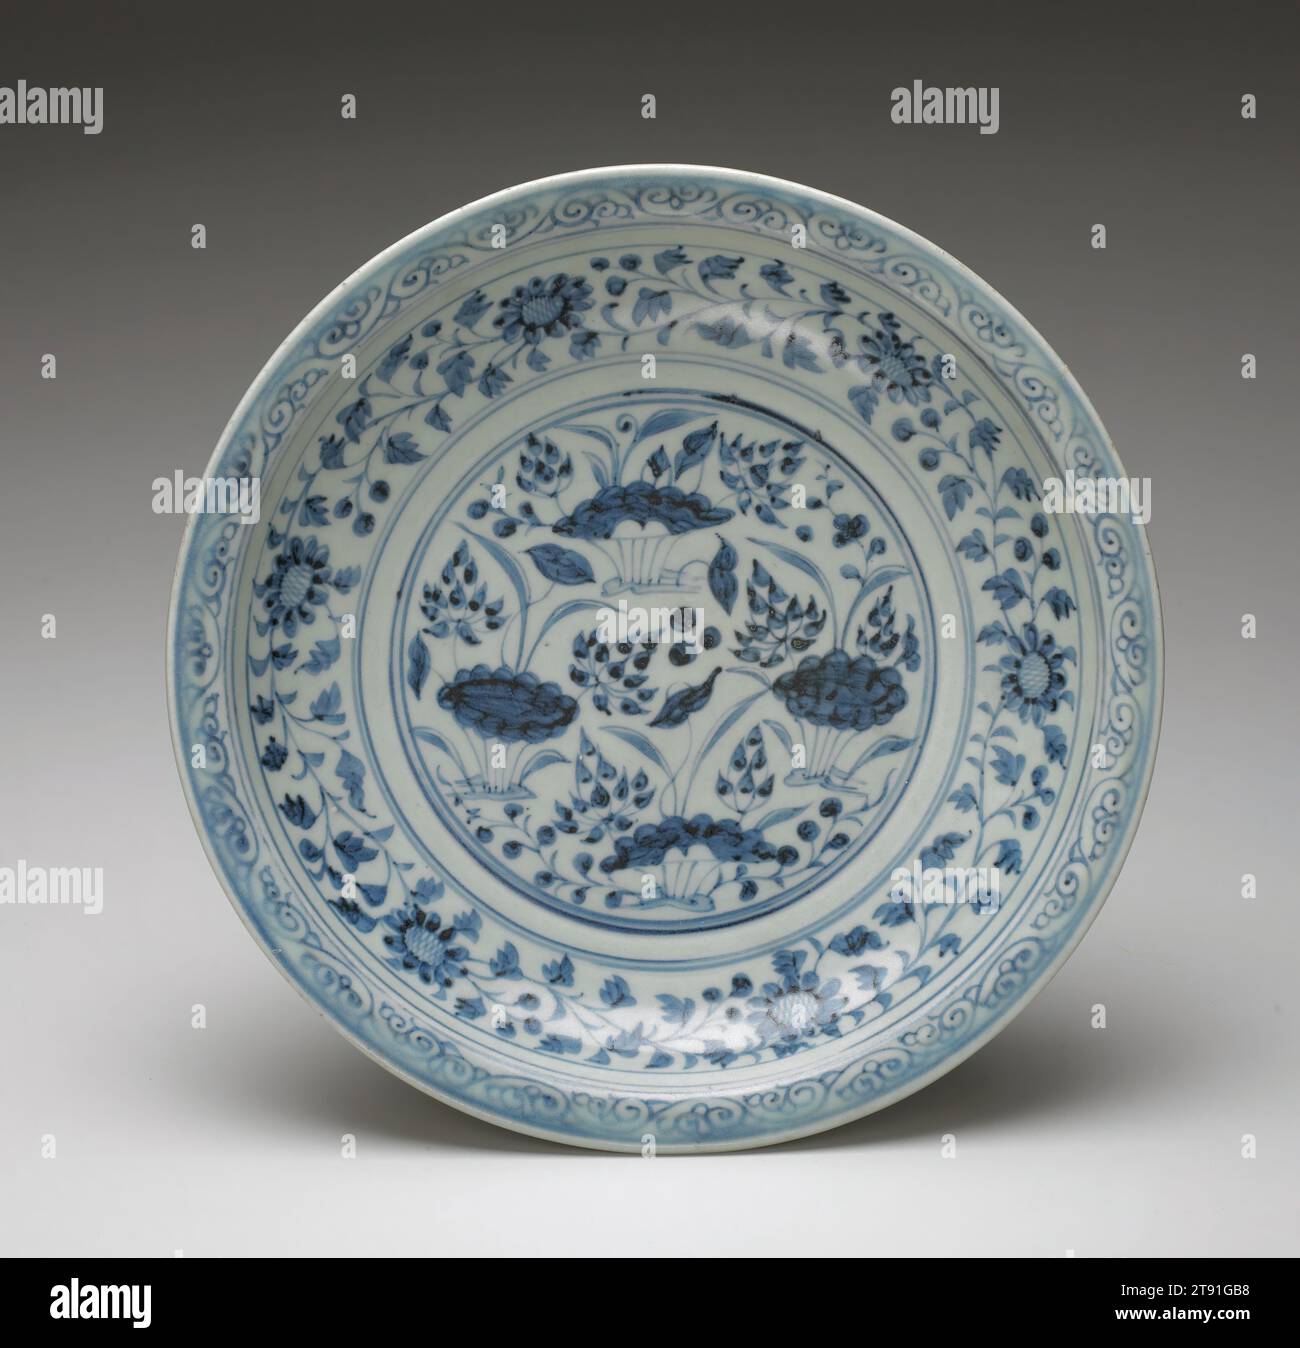 Dish, c. 1350, 2 1/16 x 11 5/16 x 11 5/16 in. (5.24 x 28.73 x 28.73 cm), Porcelain with cobalt blue décor under clear glaze, China, 14th century, Kubilai Khan, founder of the Yuan dynasty (1280-1368), established his capital at Peking and its magnificence soon attracted merchants and craftsmen from Asia and Europe. Trade was heavily promoted and the famous underglaze blue painted porcelain made at the great ceramic metropolis of Ching-te-chen in Kiangsu province, quickly gained popularity in the markets of Southeast Asia, the Middle East, and eventually Europe Stock Photo